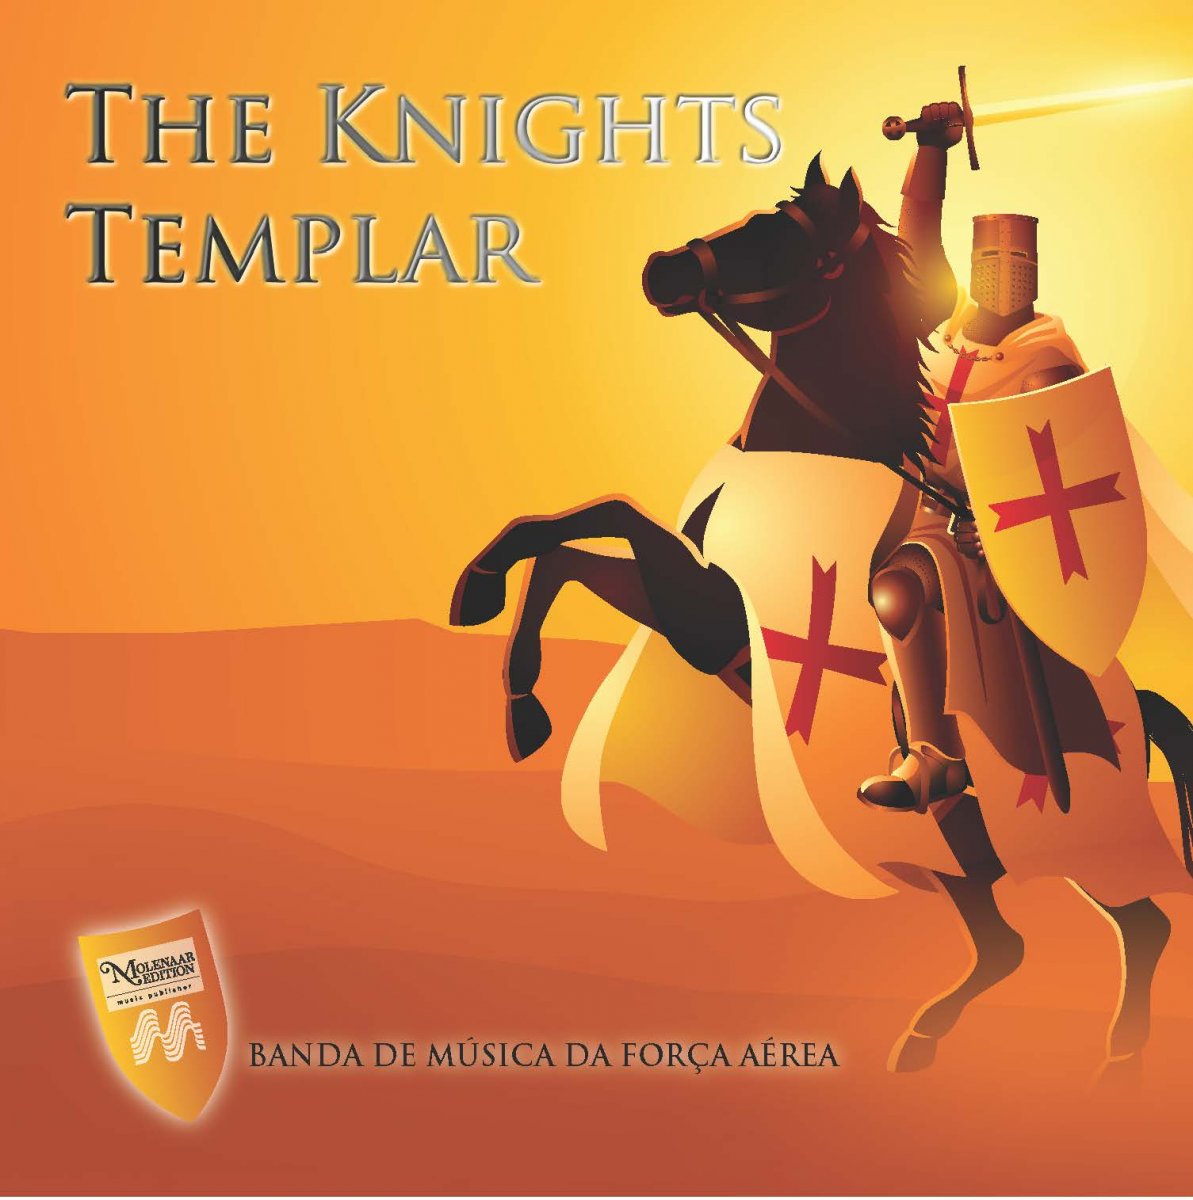 New Compositions for Concertband #93: The Knights Templar - cliquer ici